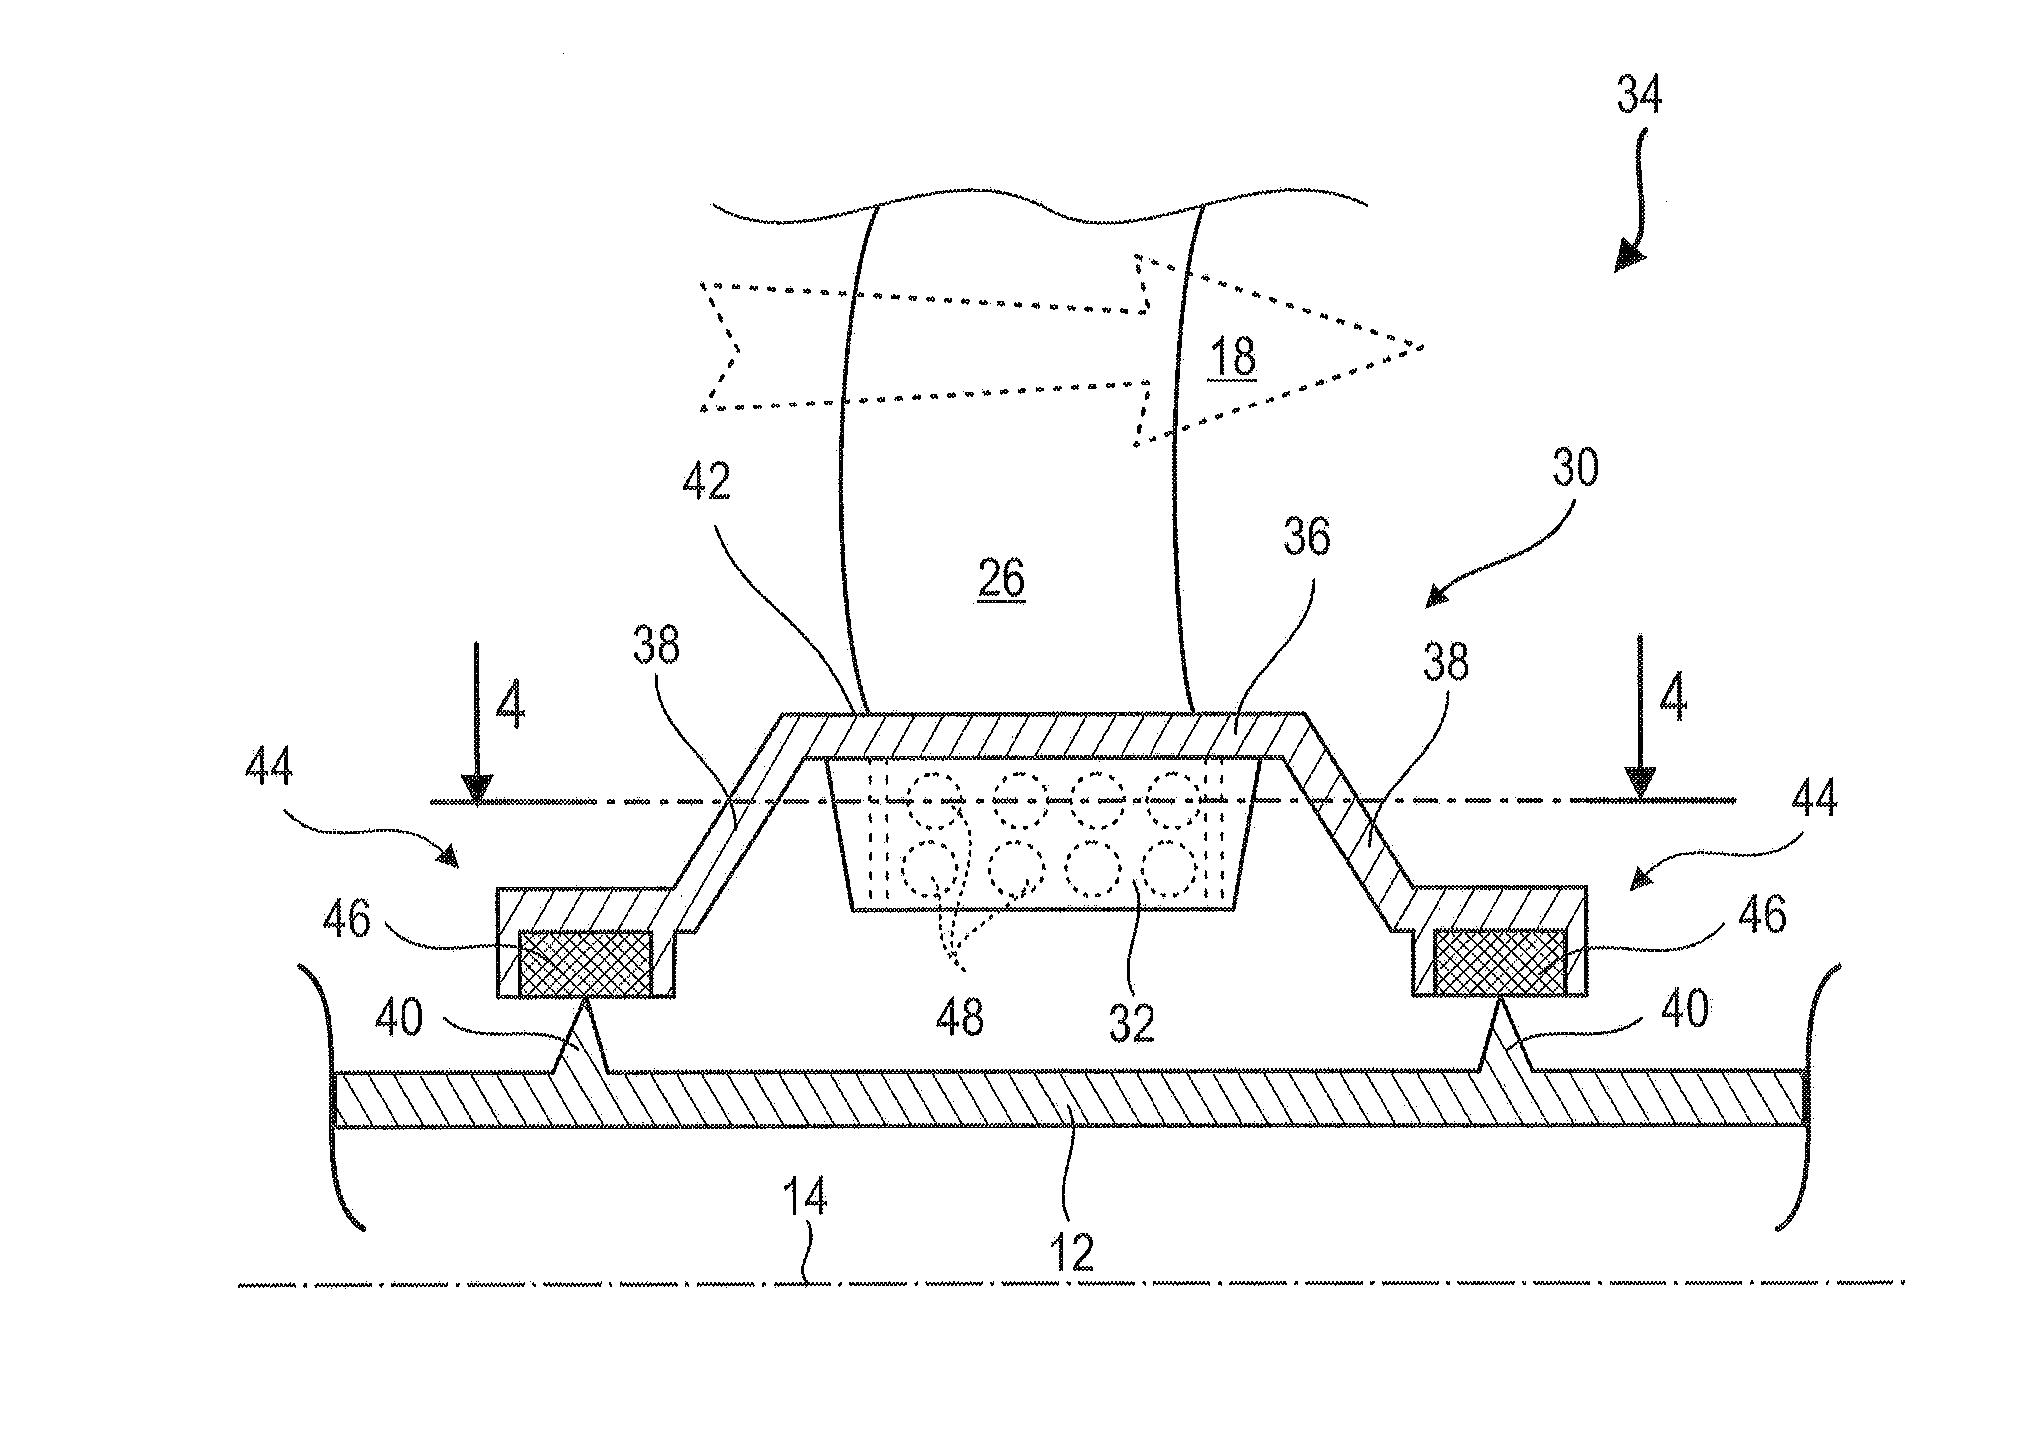 Blade and Shroud with Socket for a Compressor of an Axial Turbomachine